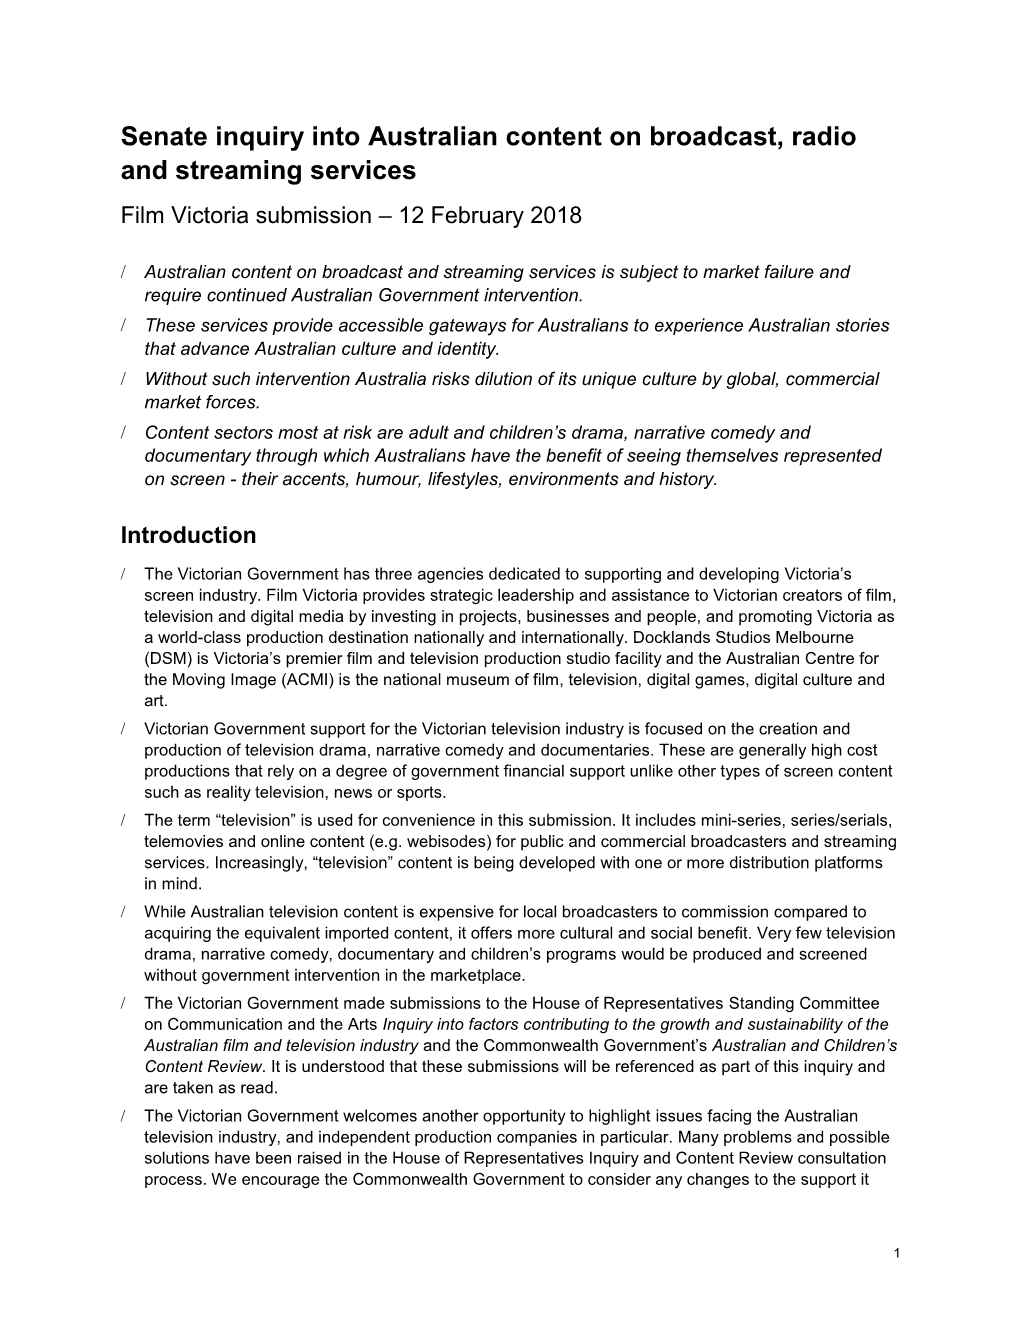 Senate Inquiry Into Australian Content on Broadcast, Radio and Streaming Services Film Victoria Submission – 12 February 2018